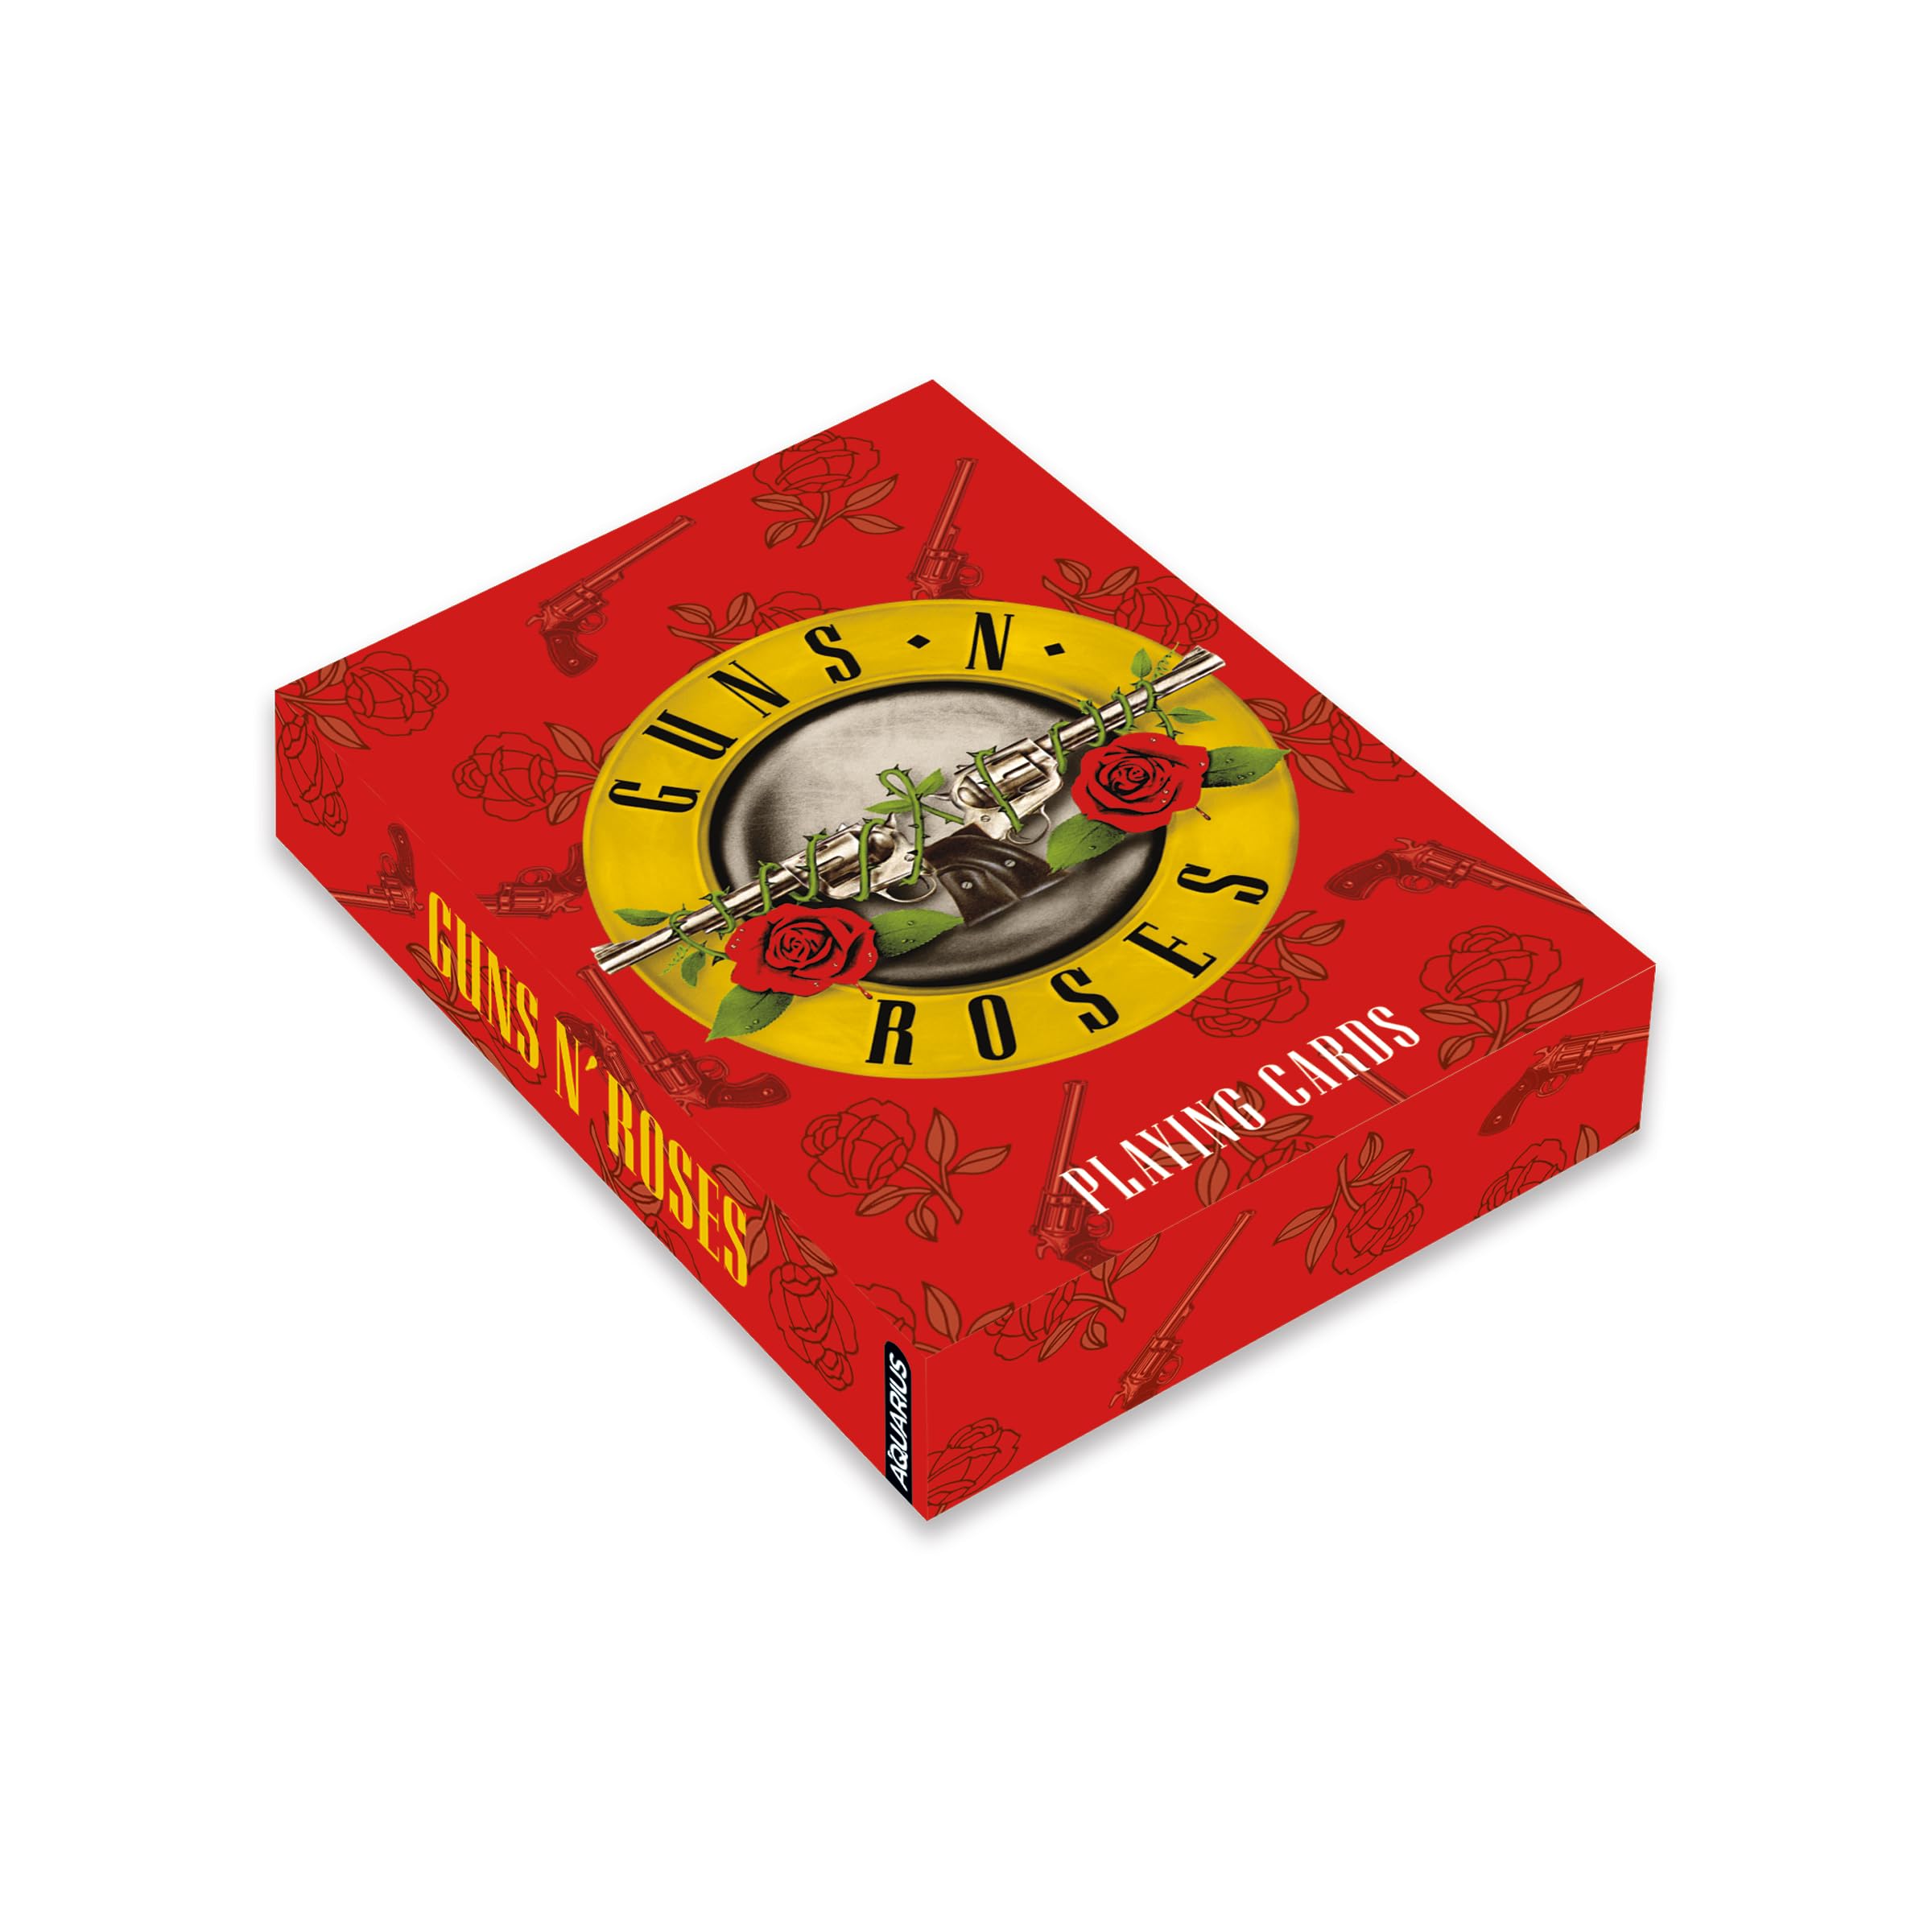 AQUARIUS Guns N' Roses Playing Cards – Guns N' Roses Themed Deck of Cards for Your Favorite Card Games - Officially Licensed Guns N' Roses Merchandise & Collectibles